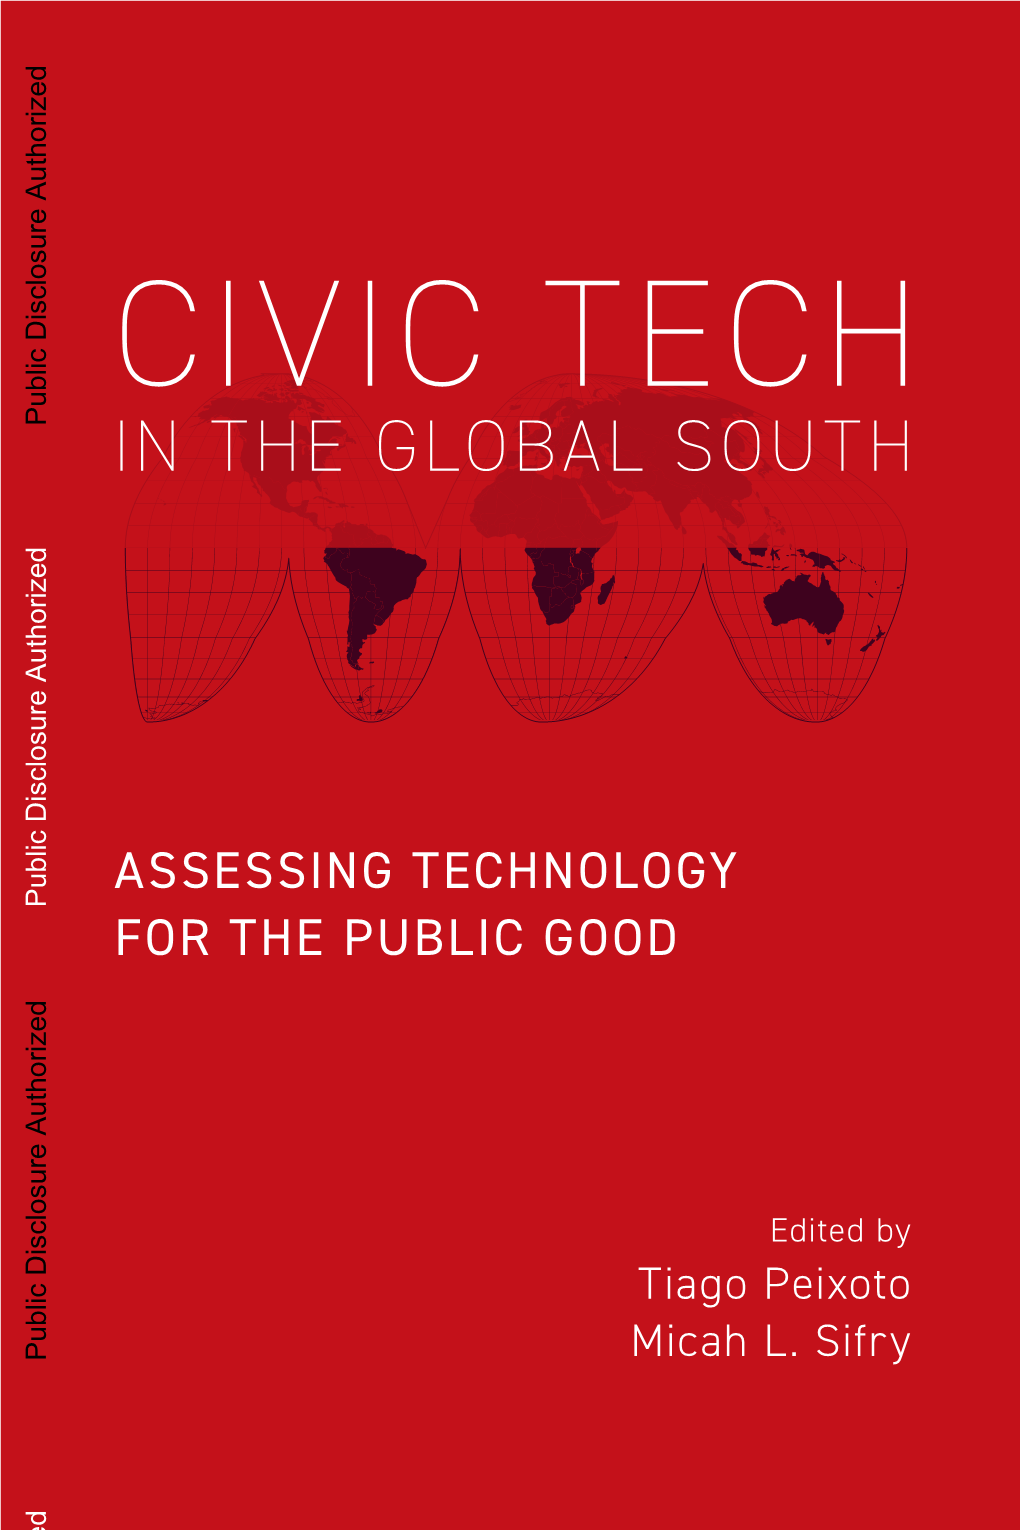 Civic Tech in the Global South